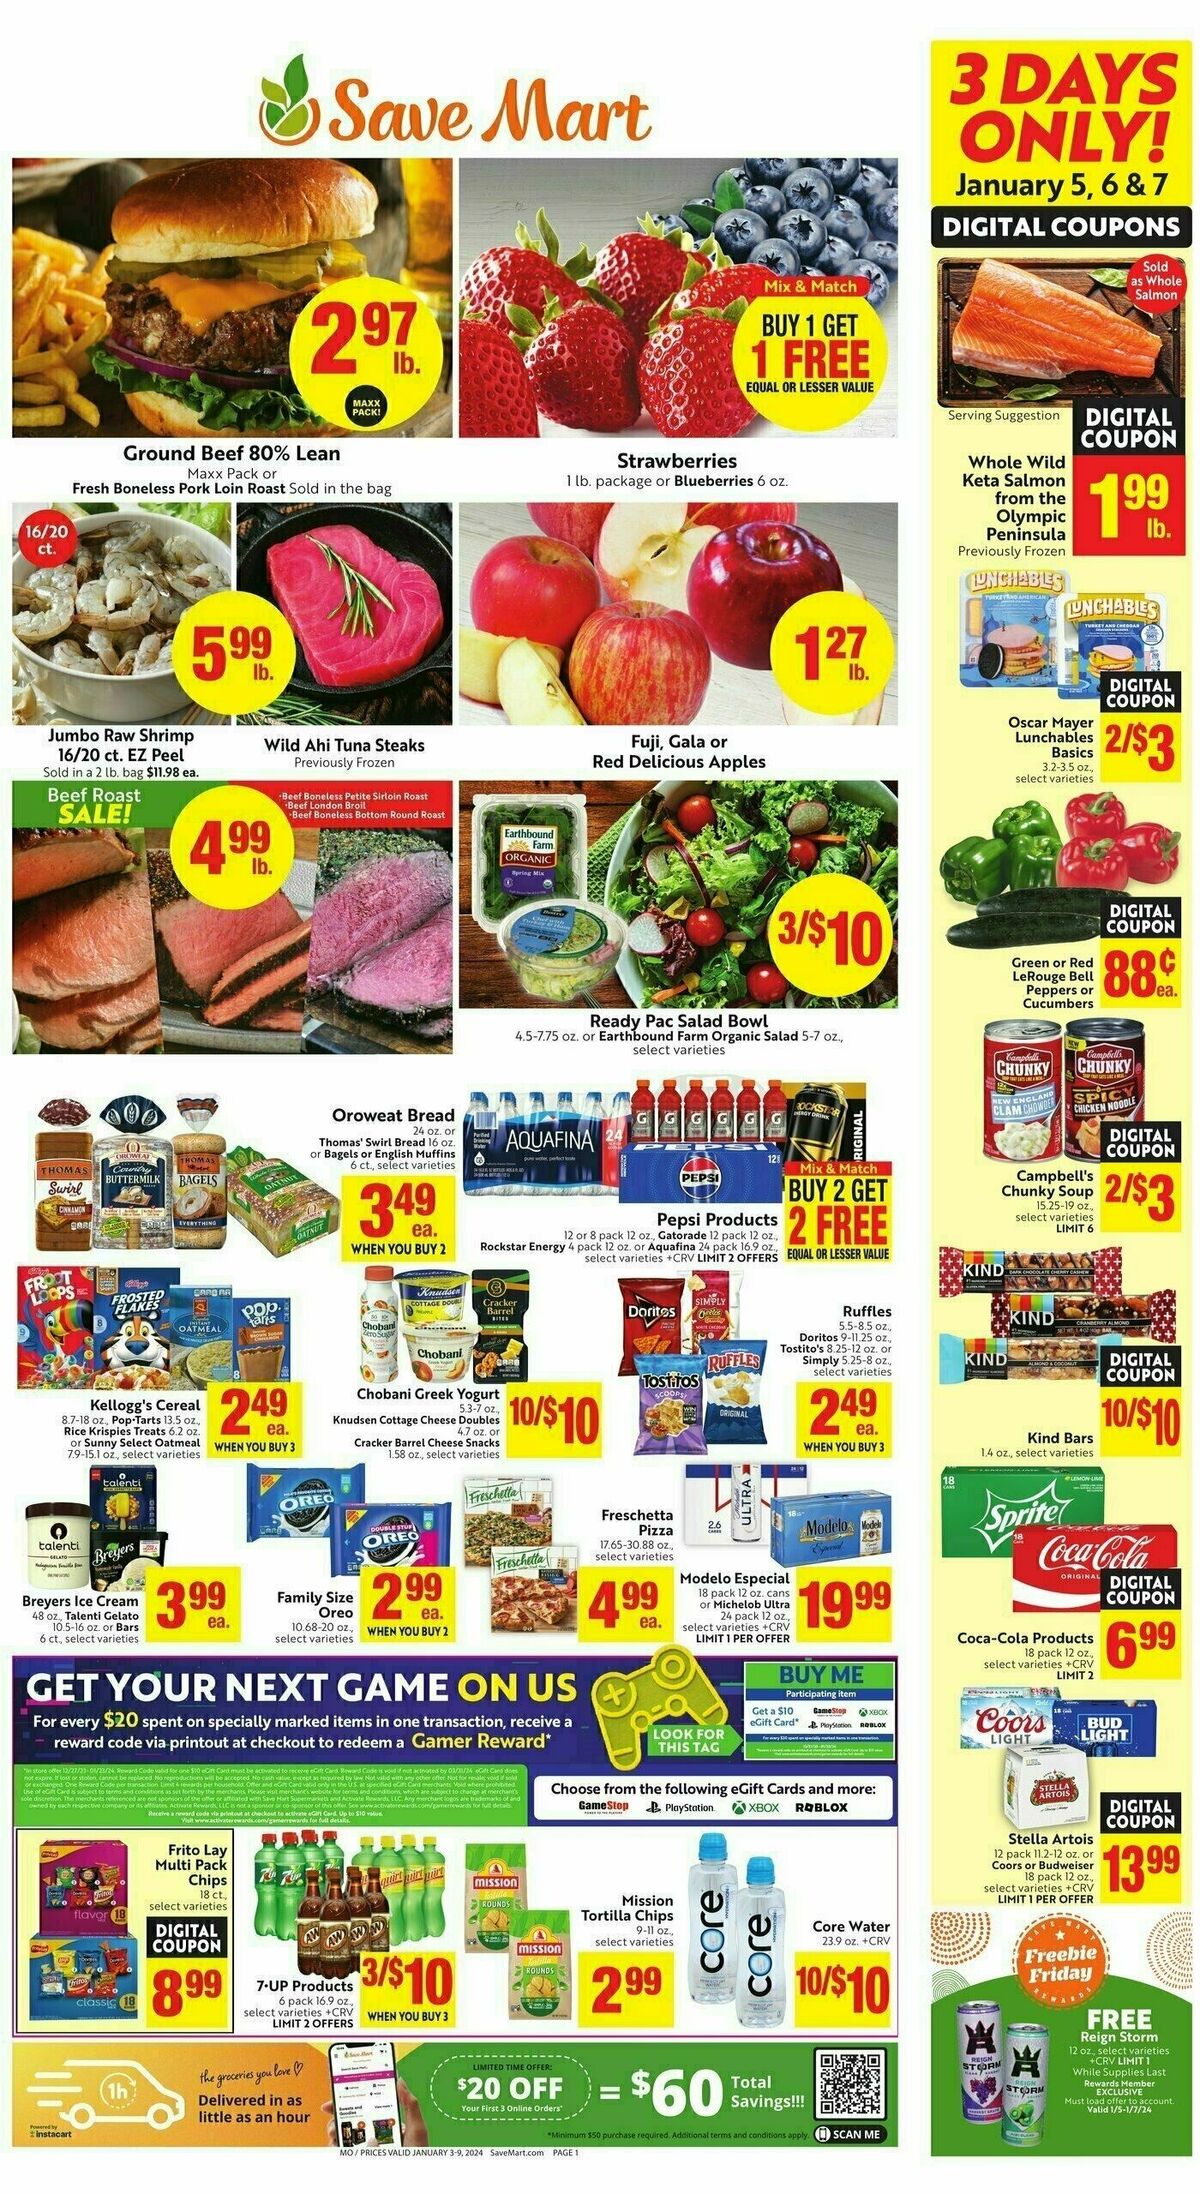 Save Mart Weekly Ad from January 3